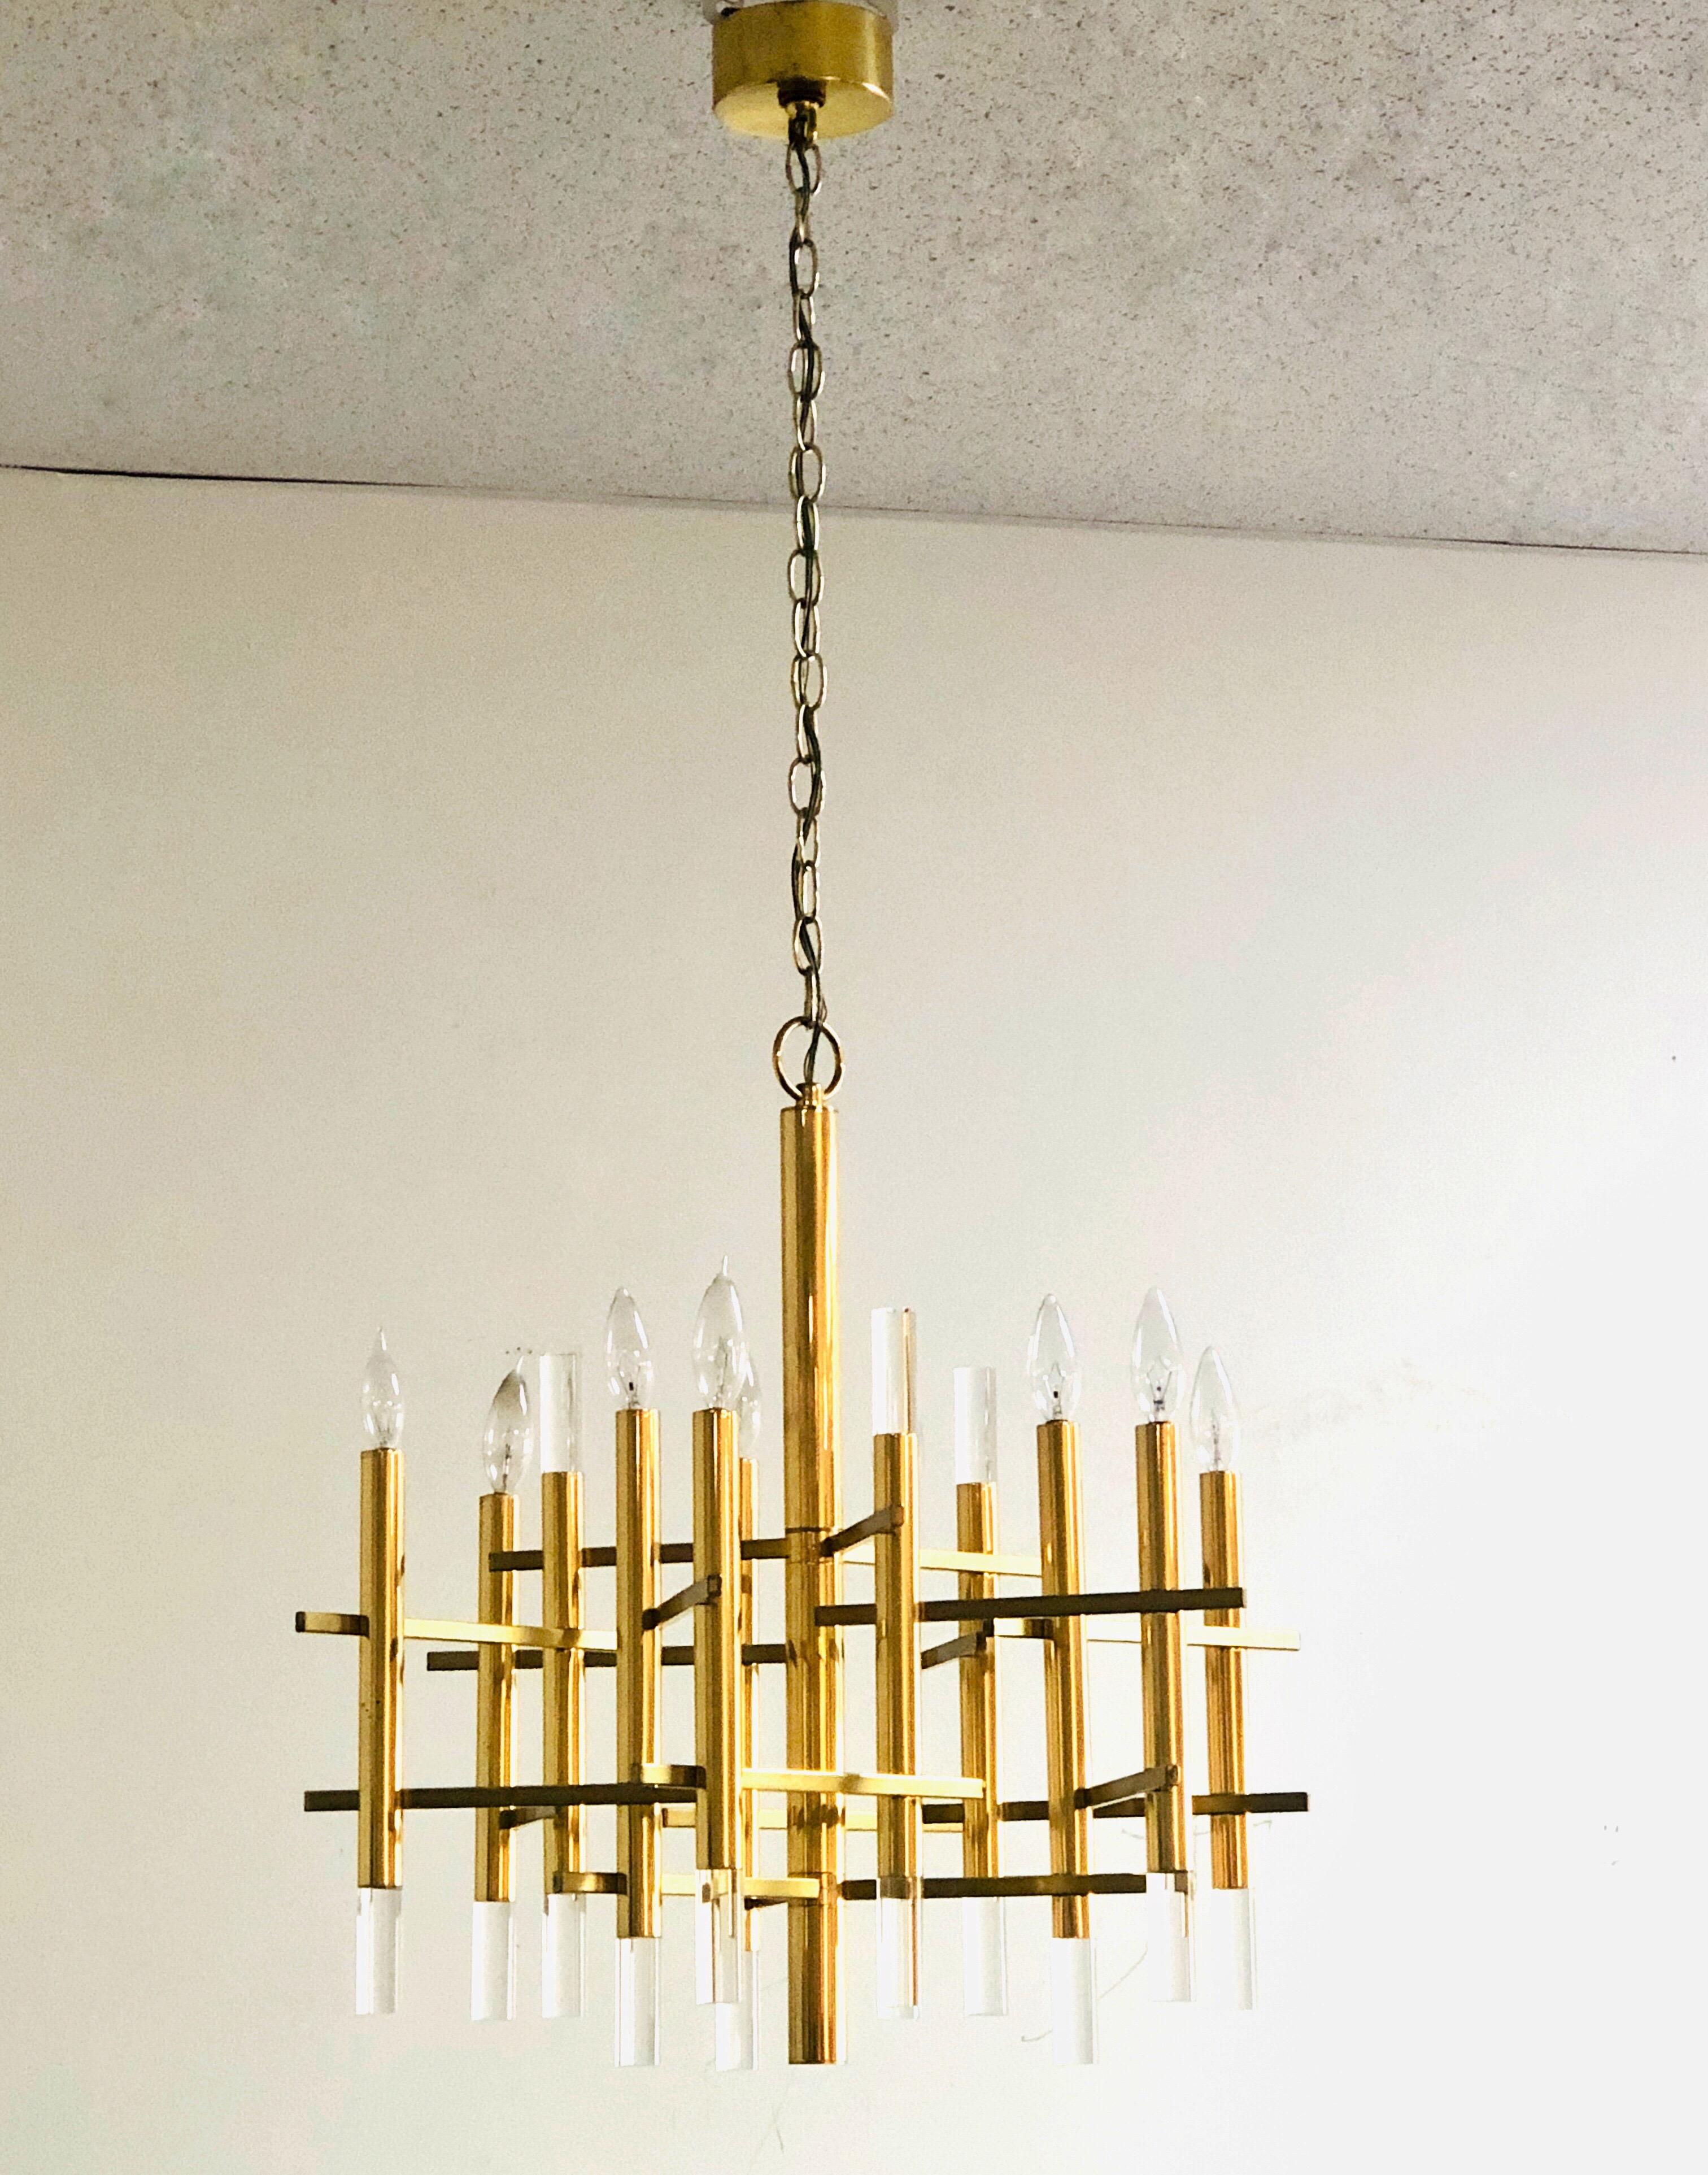 Iconic chandelier by Sciolari. Polished brass and Lucite. Takes 9 chandelier bulbs. 50